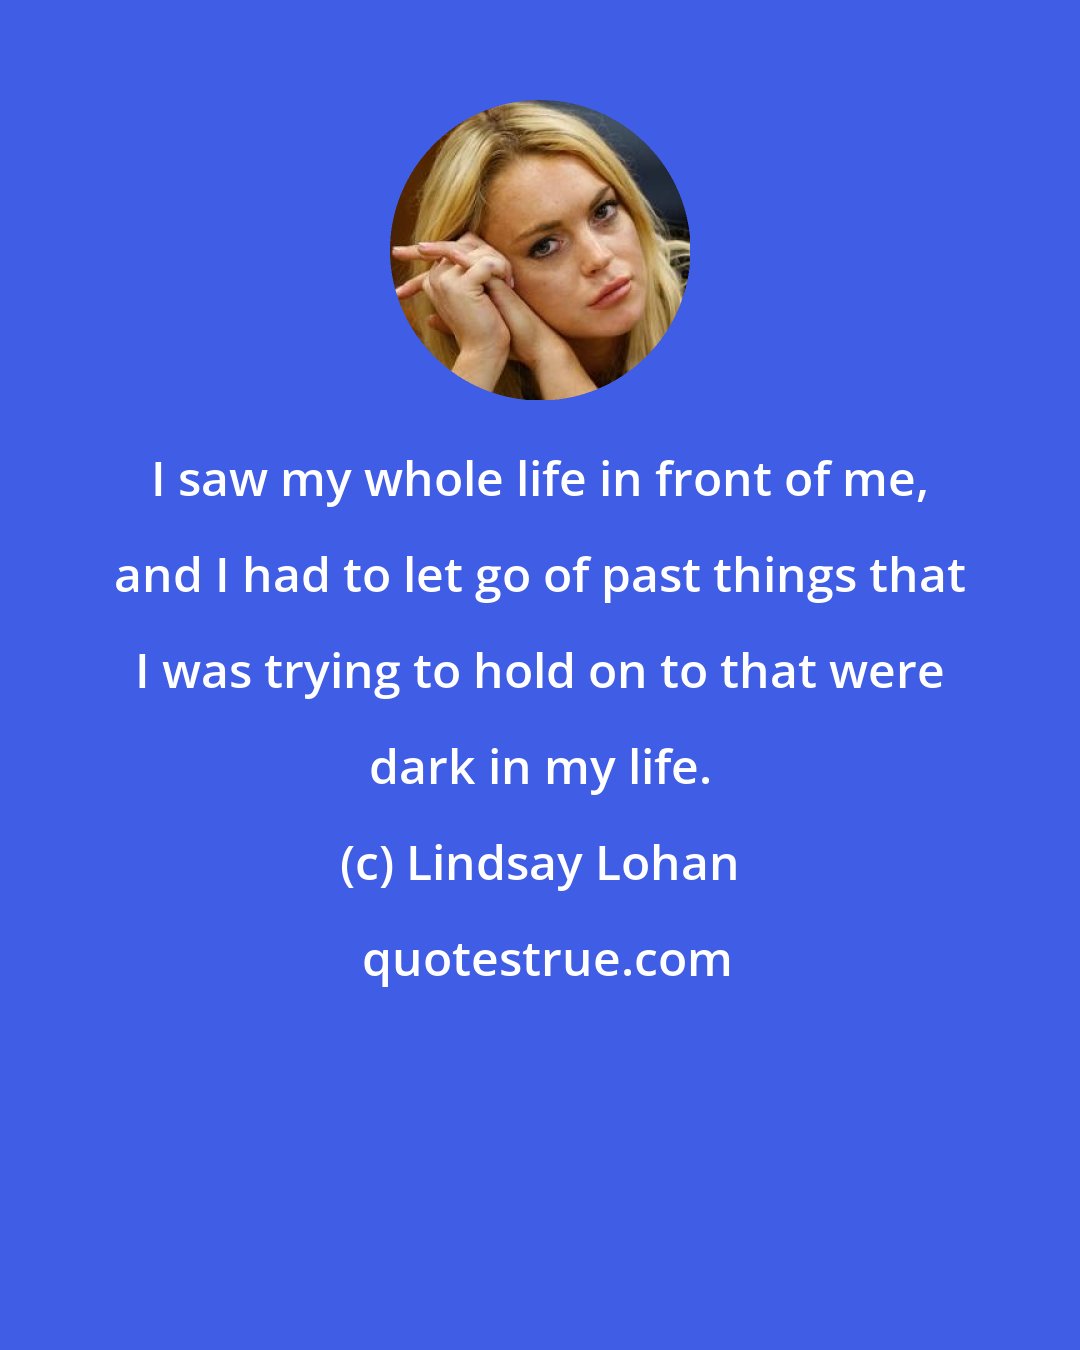 Lindsay Lohan: I saw my whole life in front of me, and I had to let go of past things that I was trying to hold on to that were dark in my life.